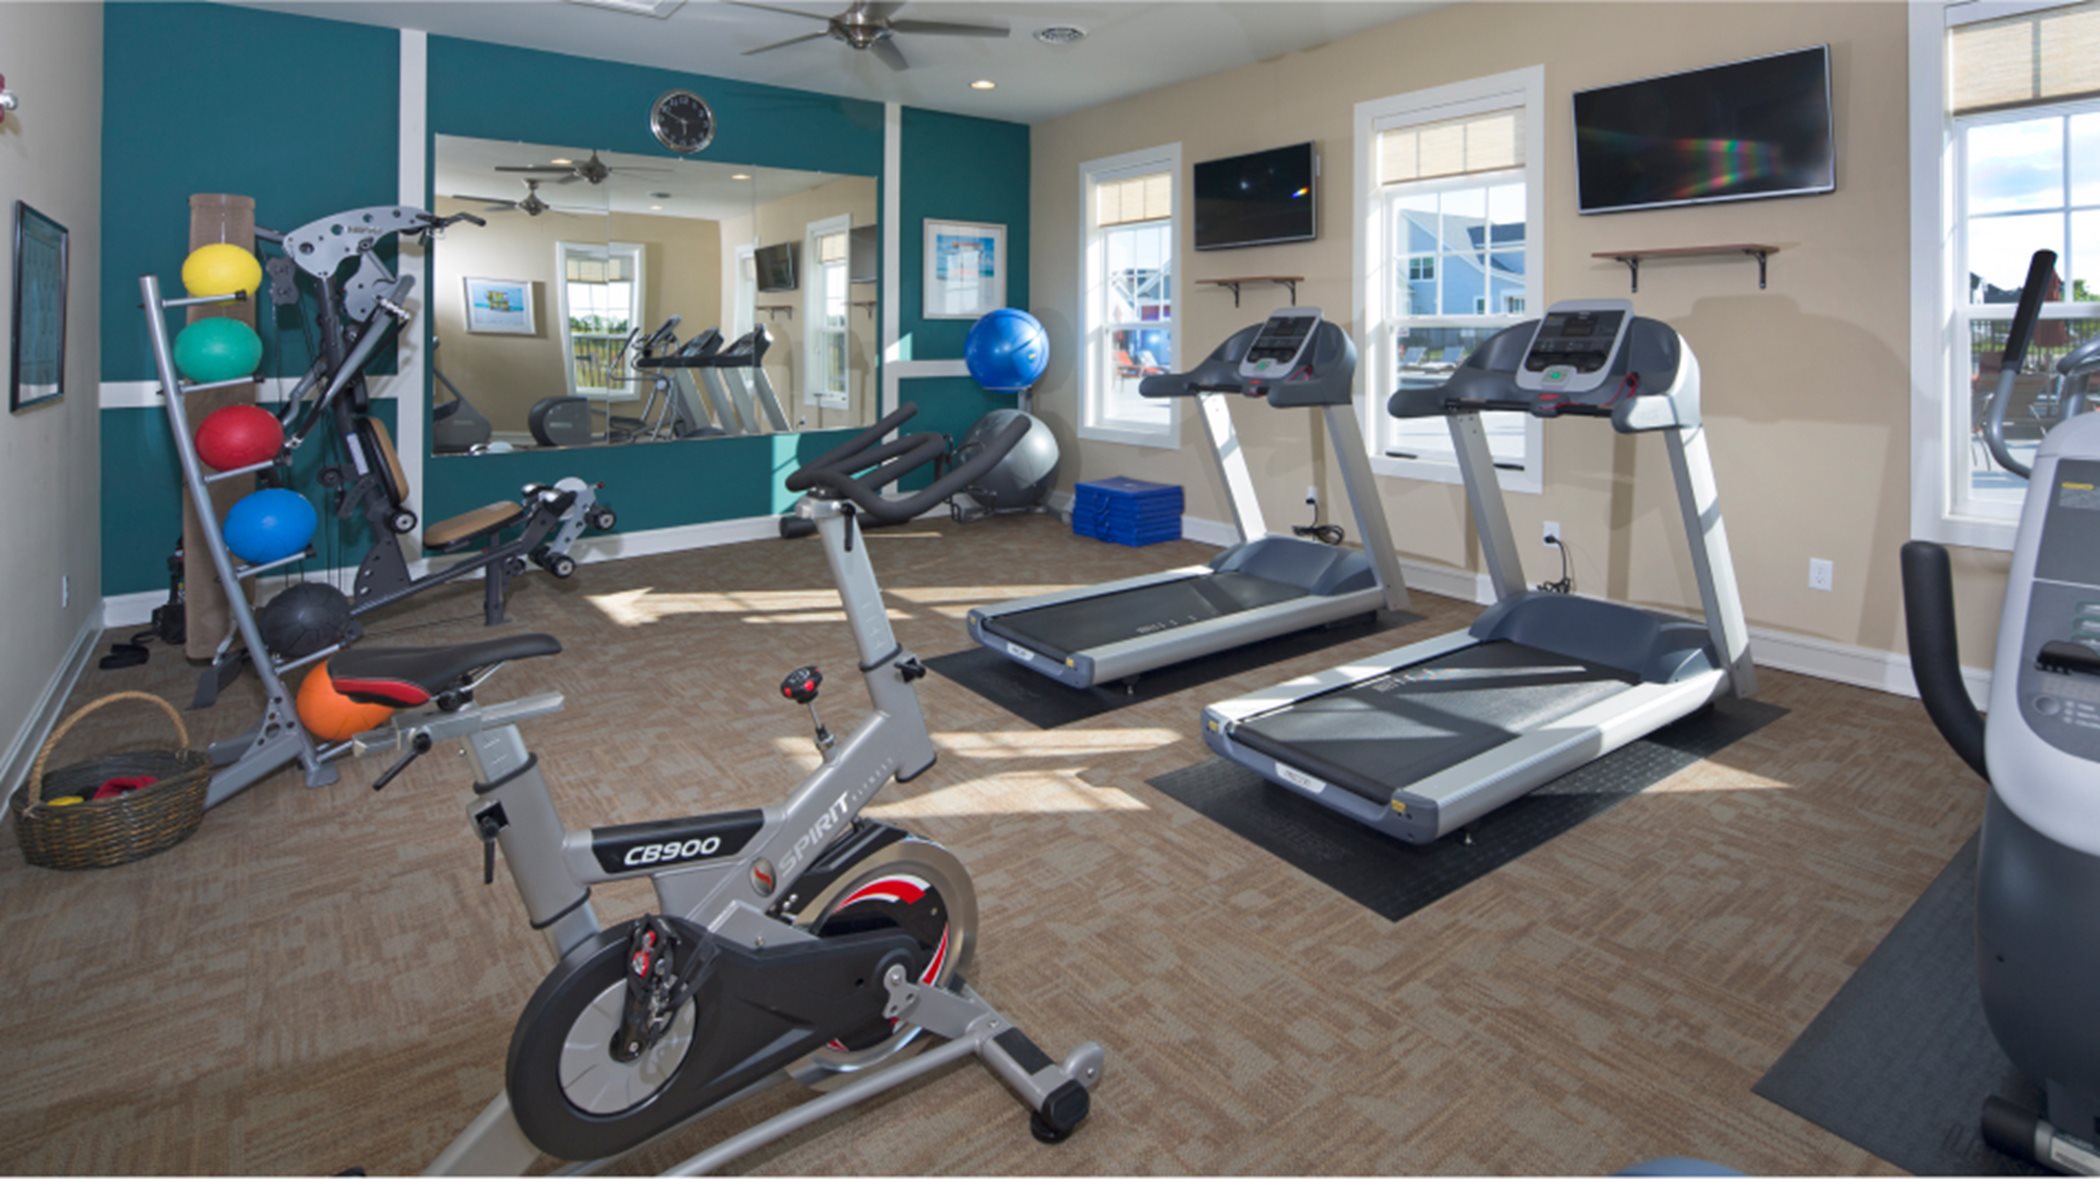 Heritage Creek Amenity Clubhouse Fitness Center